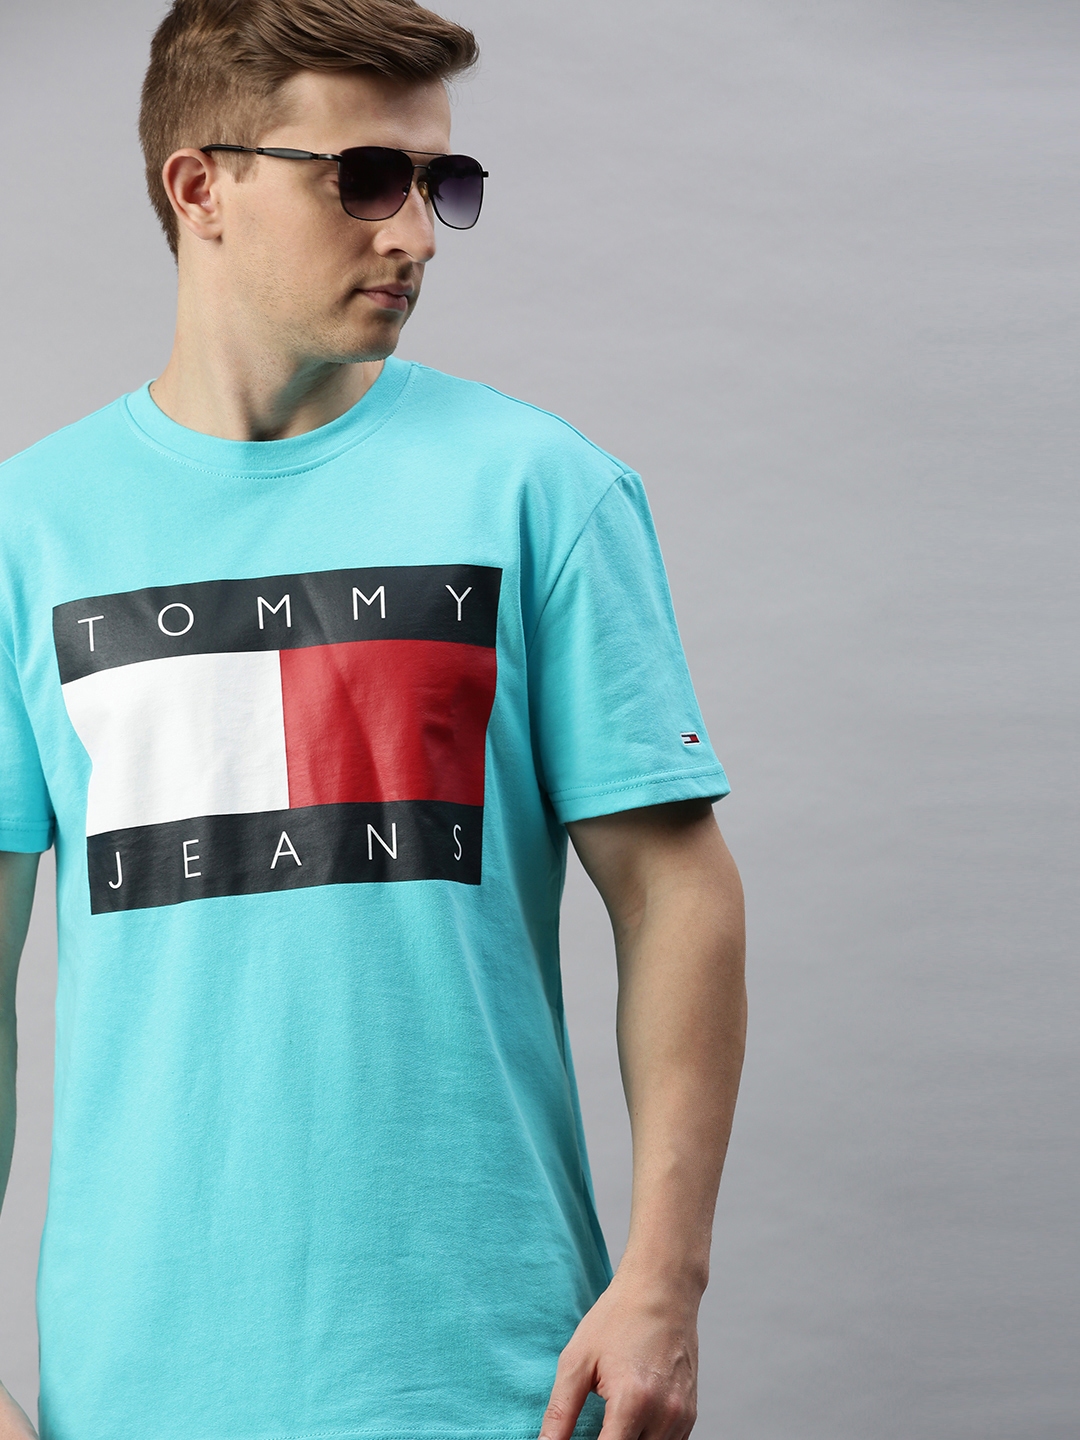 Buy Tommy Hilfiger Men Turquoise Blue Printed Round Neck T Shirt ...